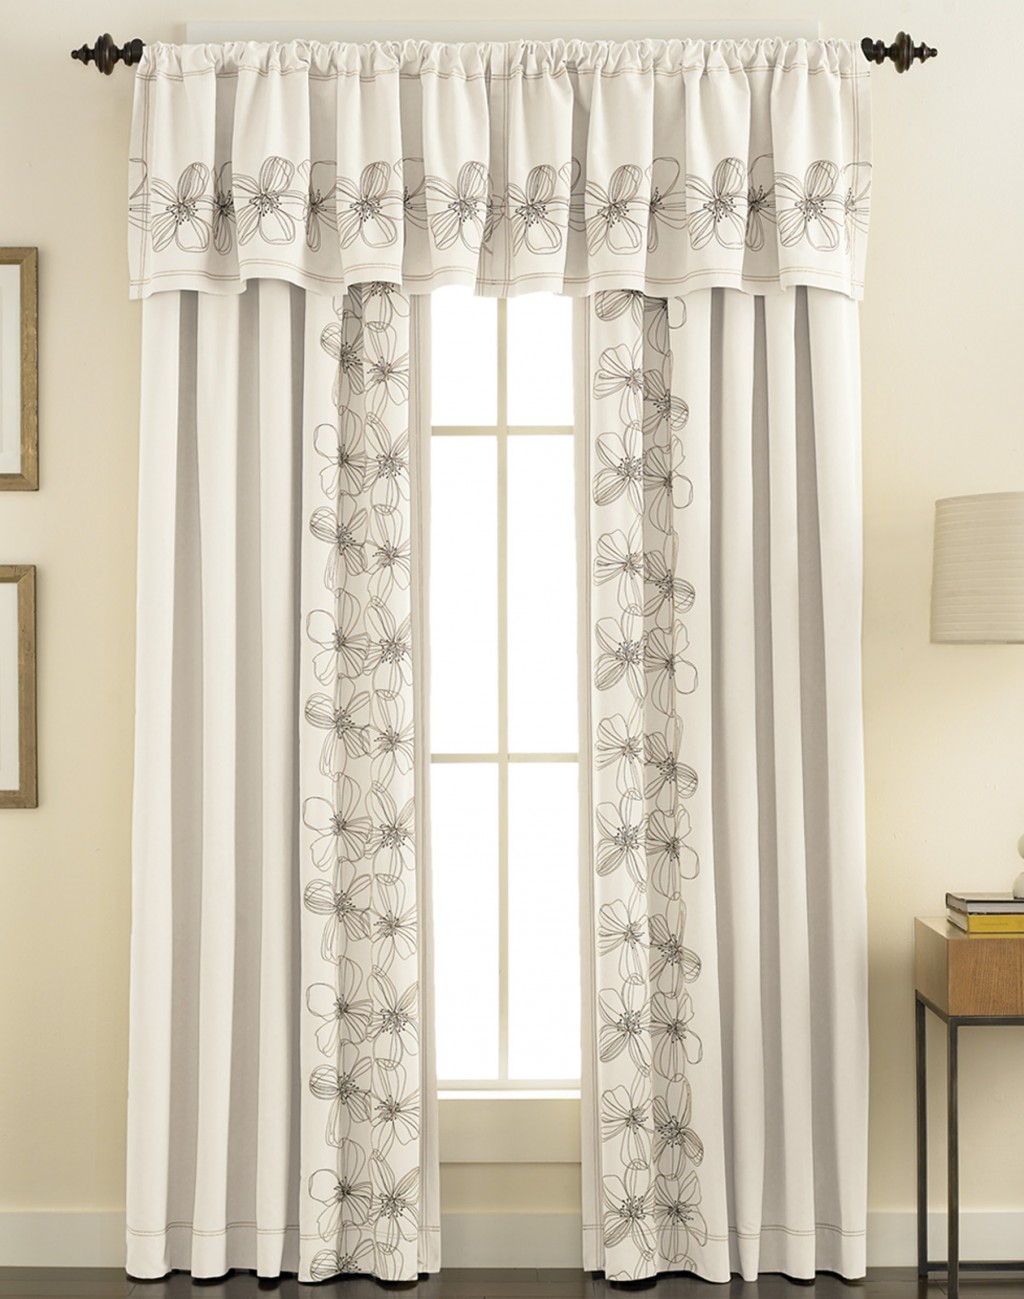 Valence Curtains in Curtain